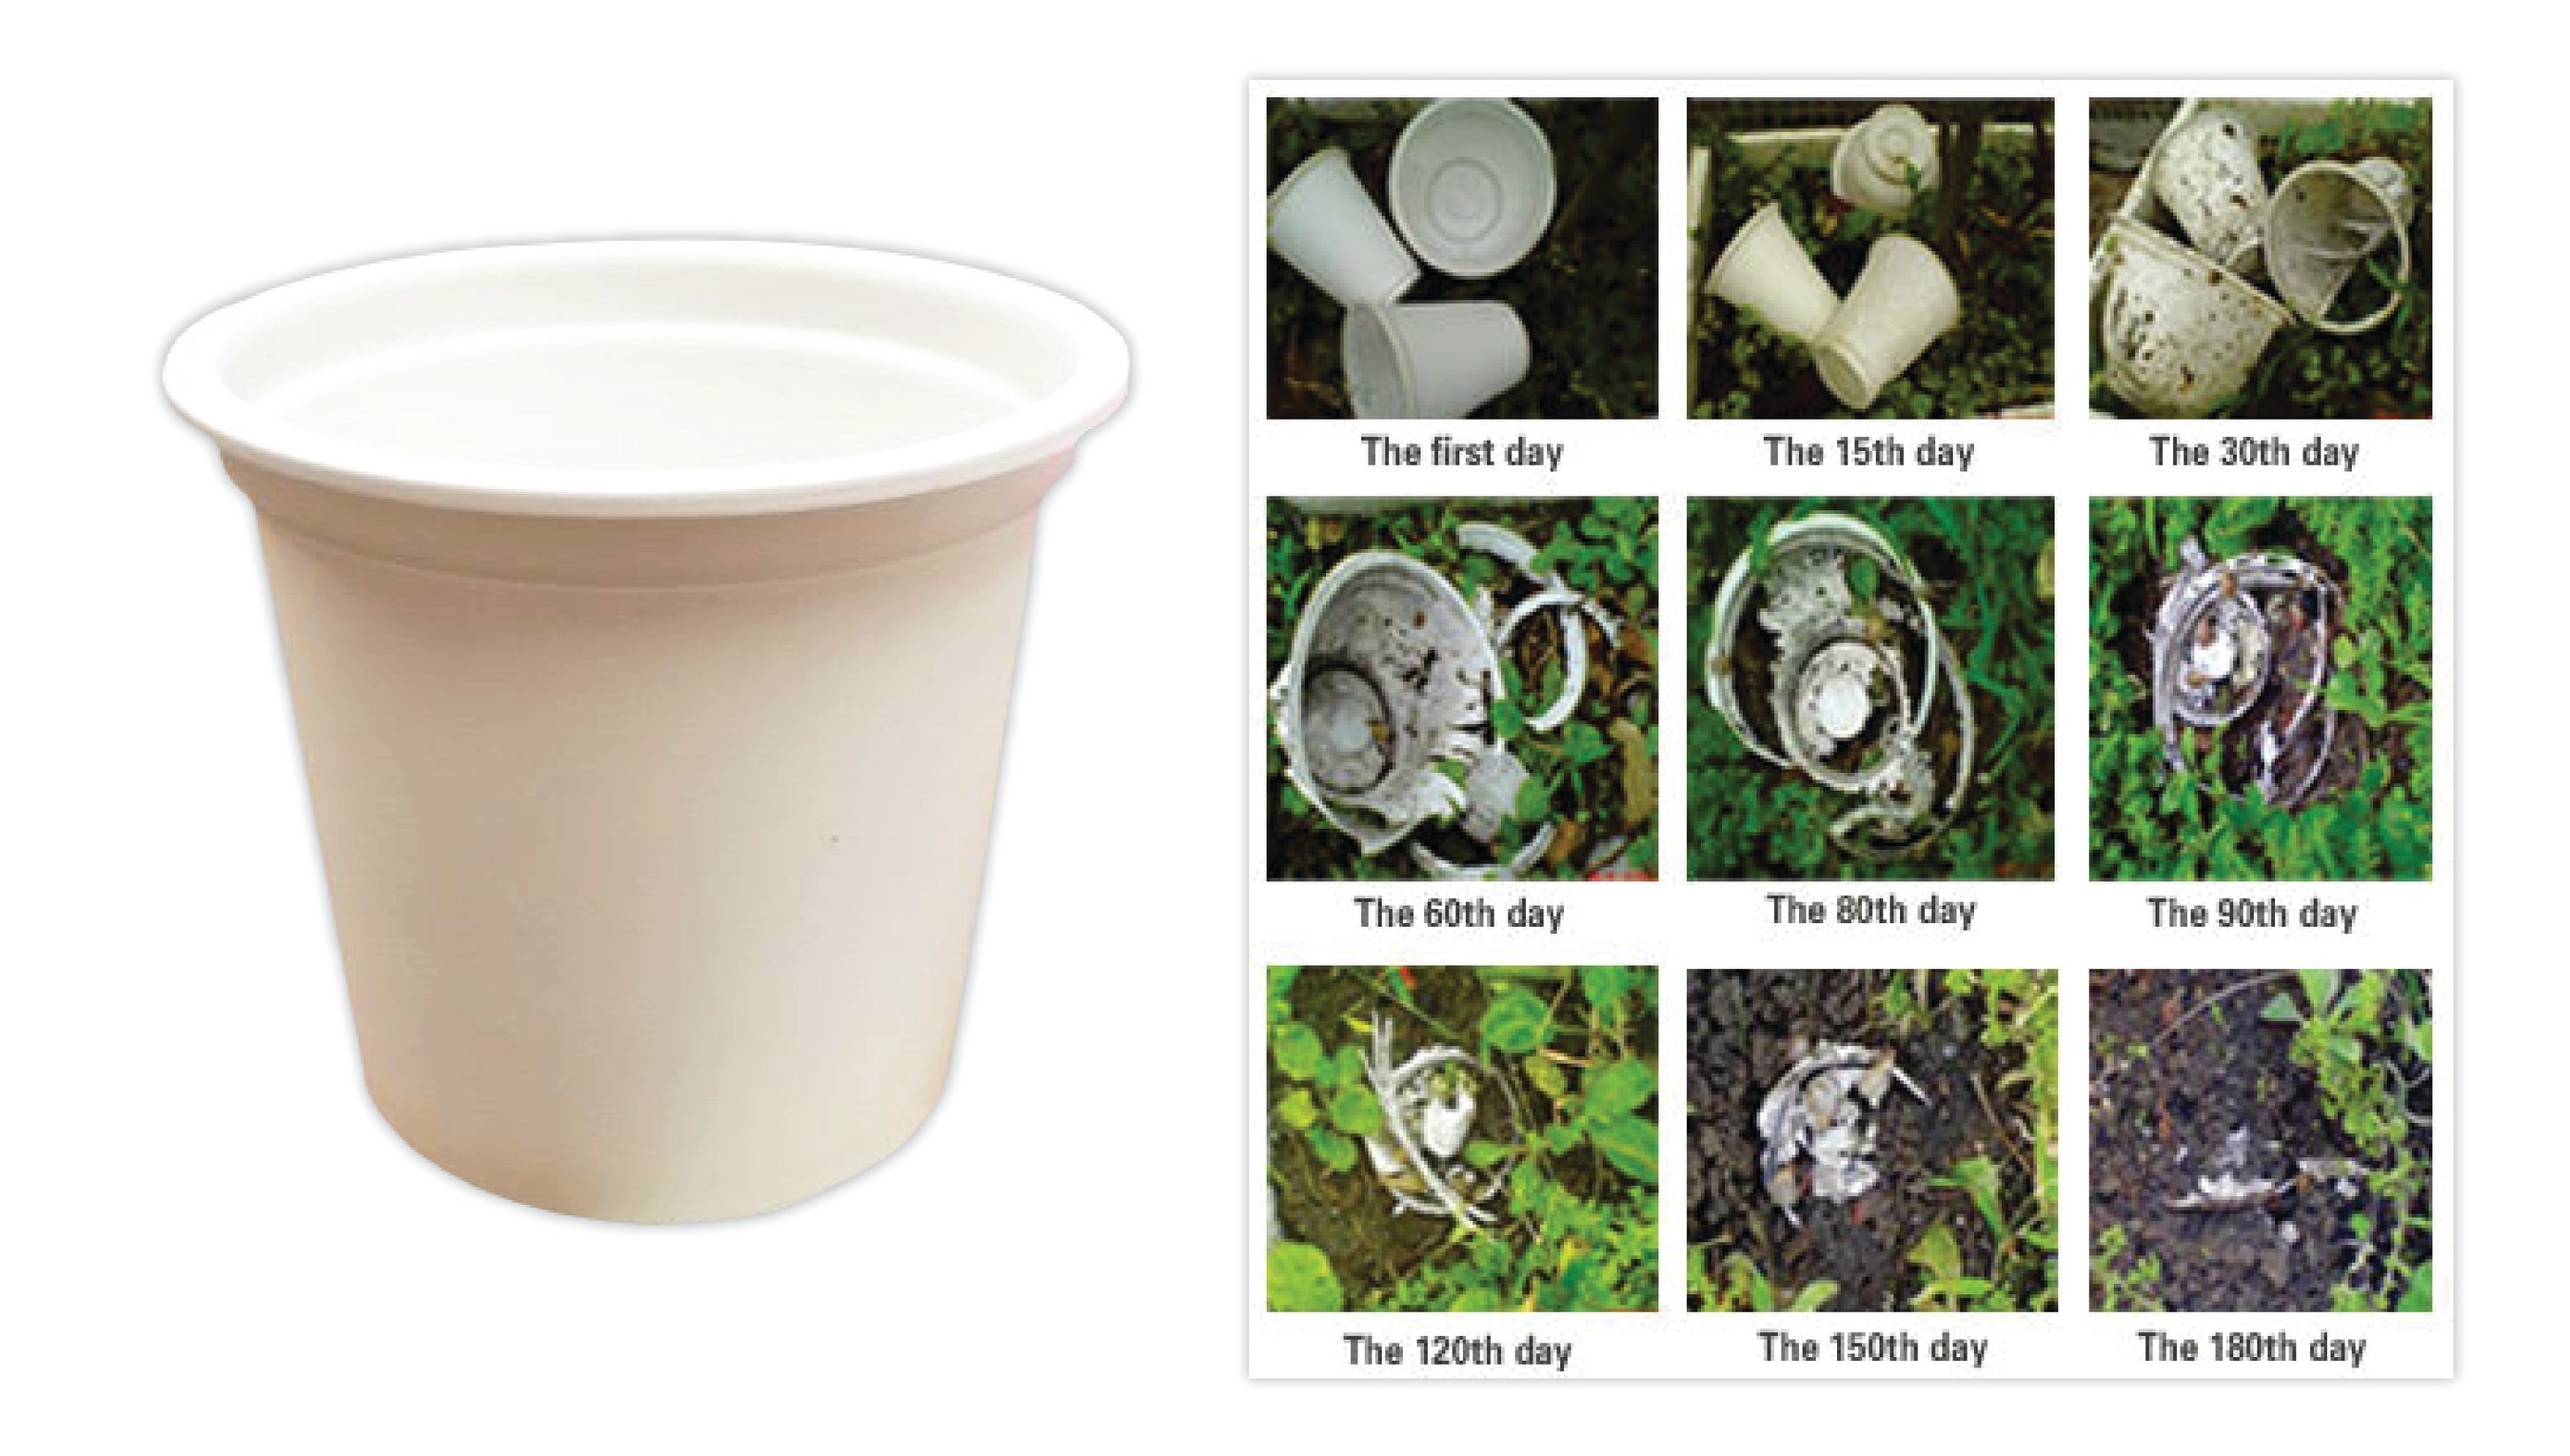 White Coffee Corporation's latest development, BioCup(TM) is the first to capture the ecological niche for biodegradable pods. BioCup(TM) is both compostable and biodegradable with 90% degradation after six months.